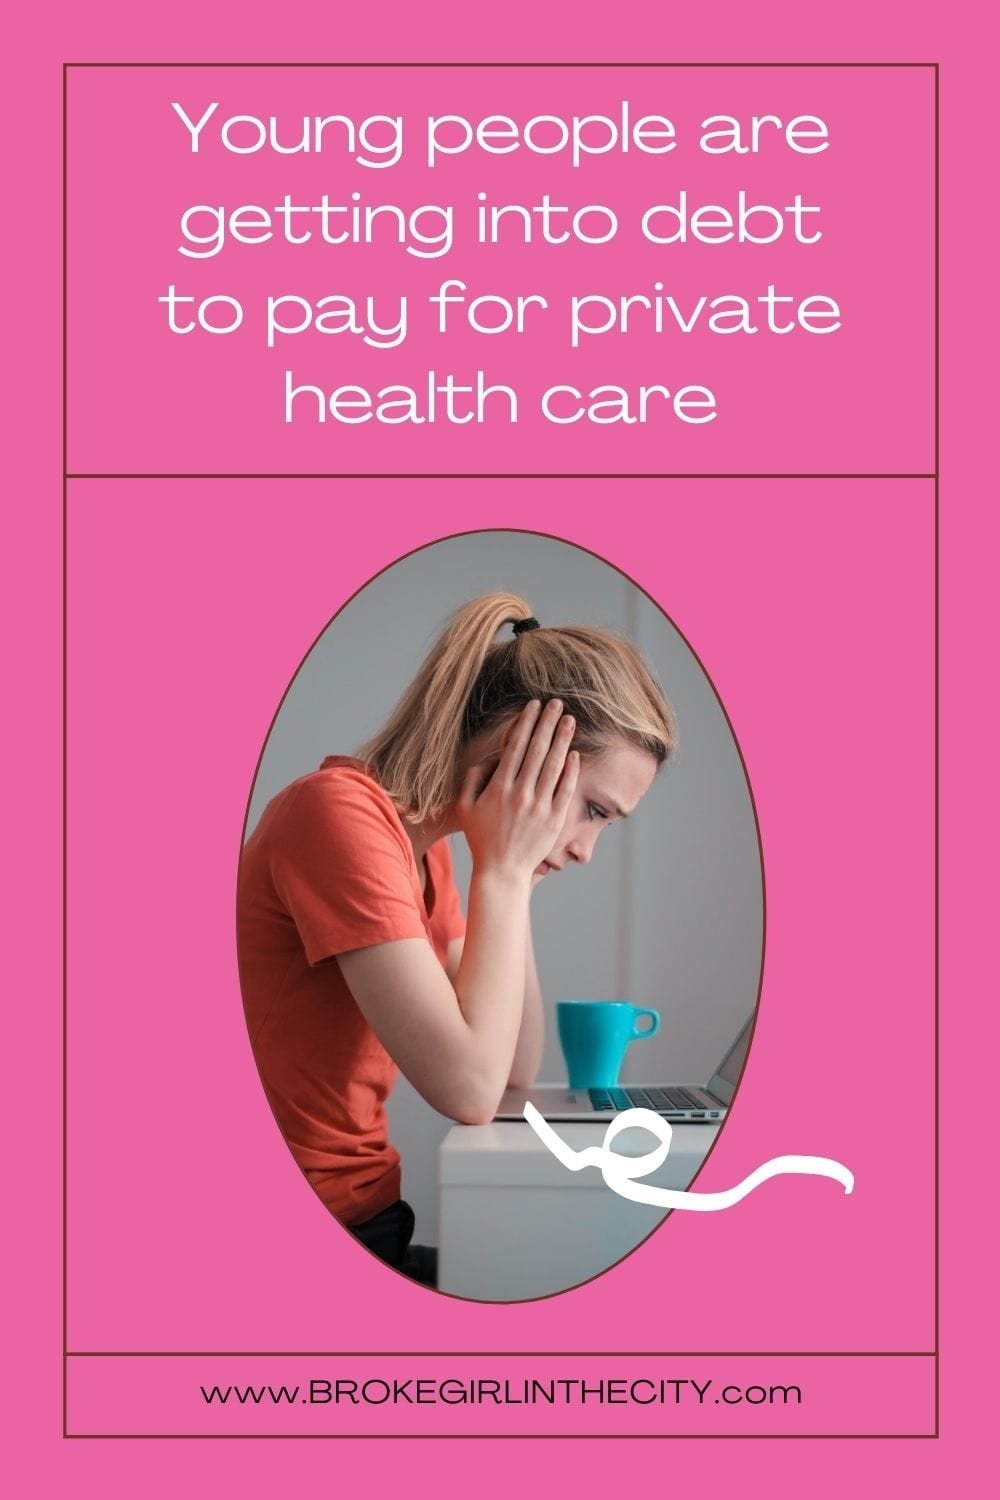 Young people getting into debt to pay for private health care